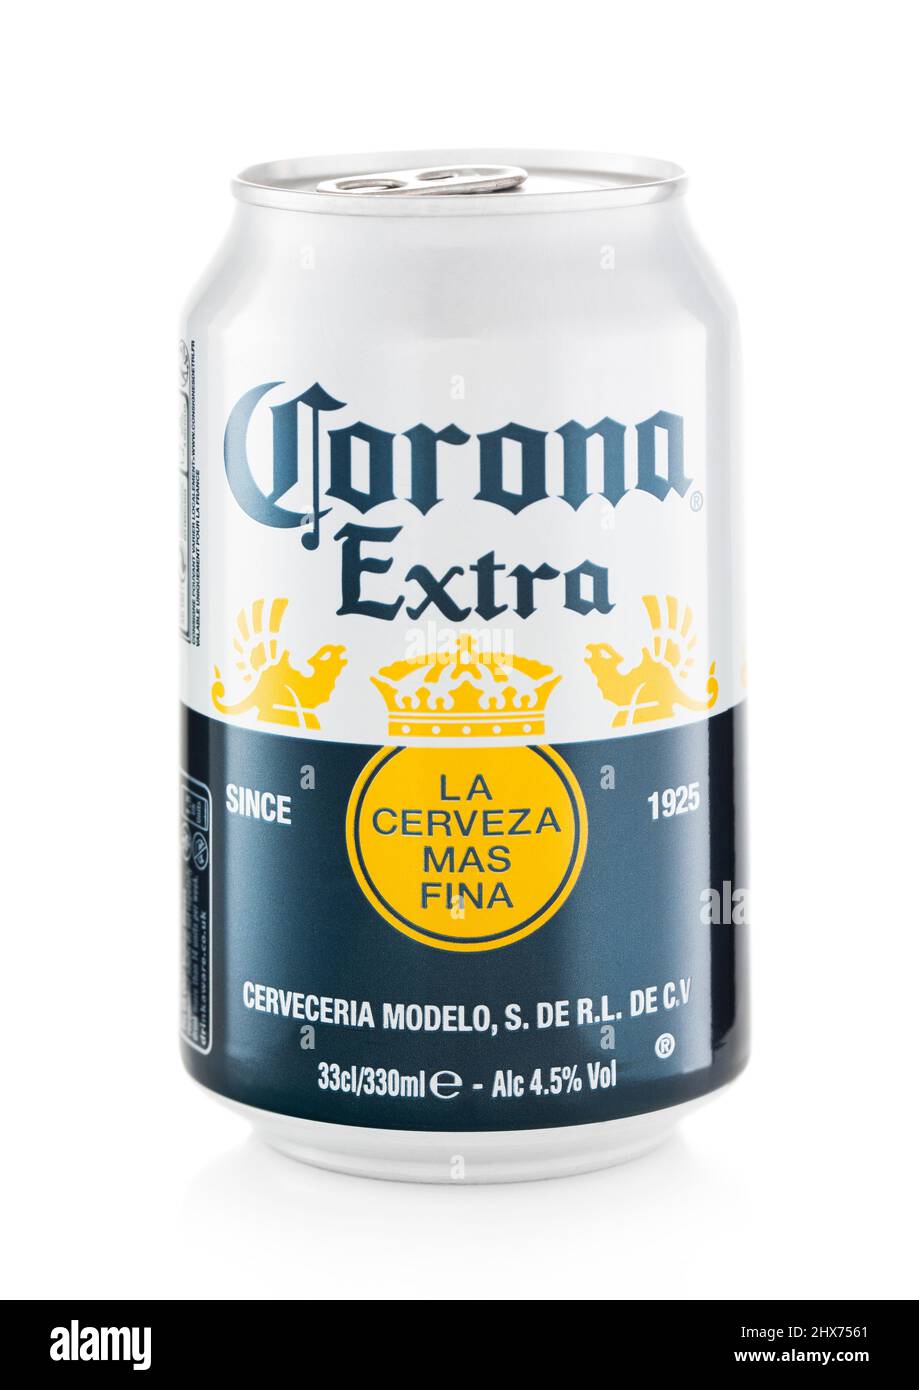 LONDON,UK - FEBRUARY 01,2022: Corona Extra Mexican lager beer in ...